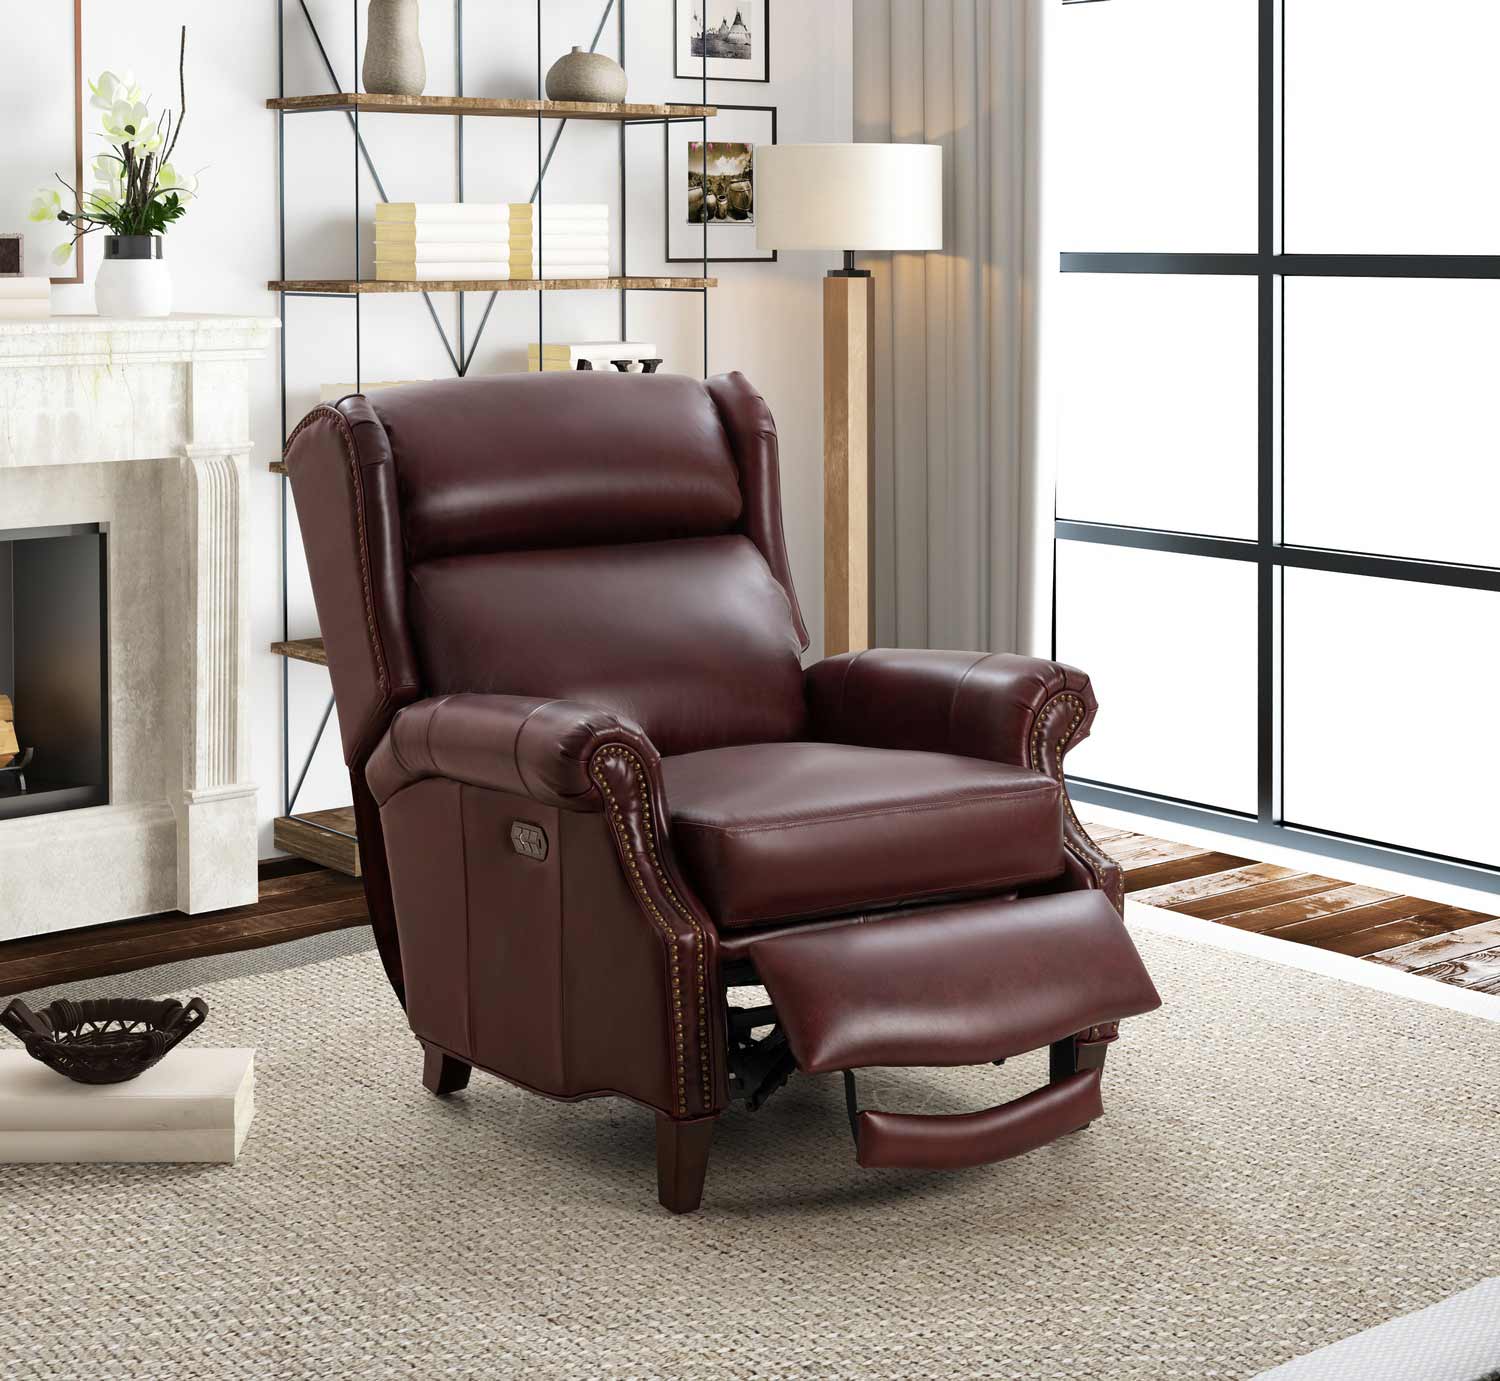 Barcalounger Philadelphia Power Recliner Chair with Power Head Rest and Lumbar - Emerson Sangria/Top Grain Leather